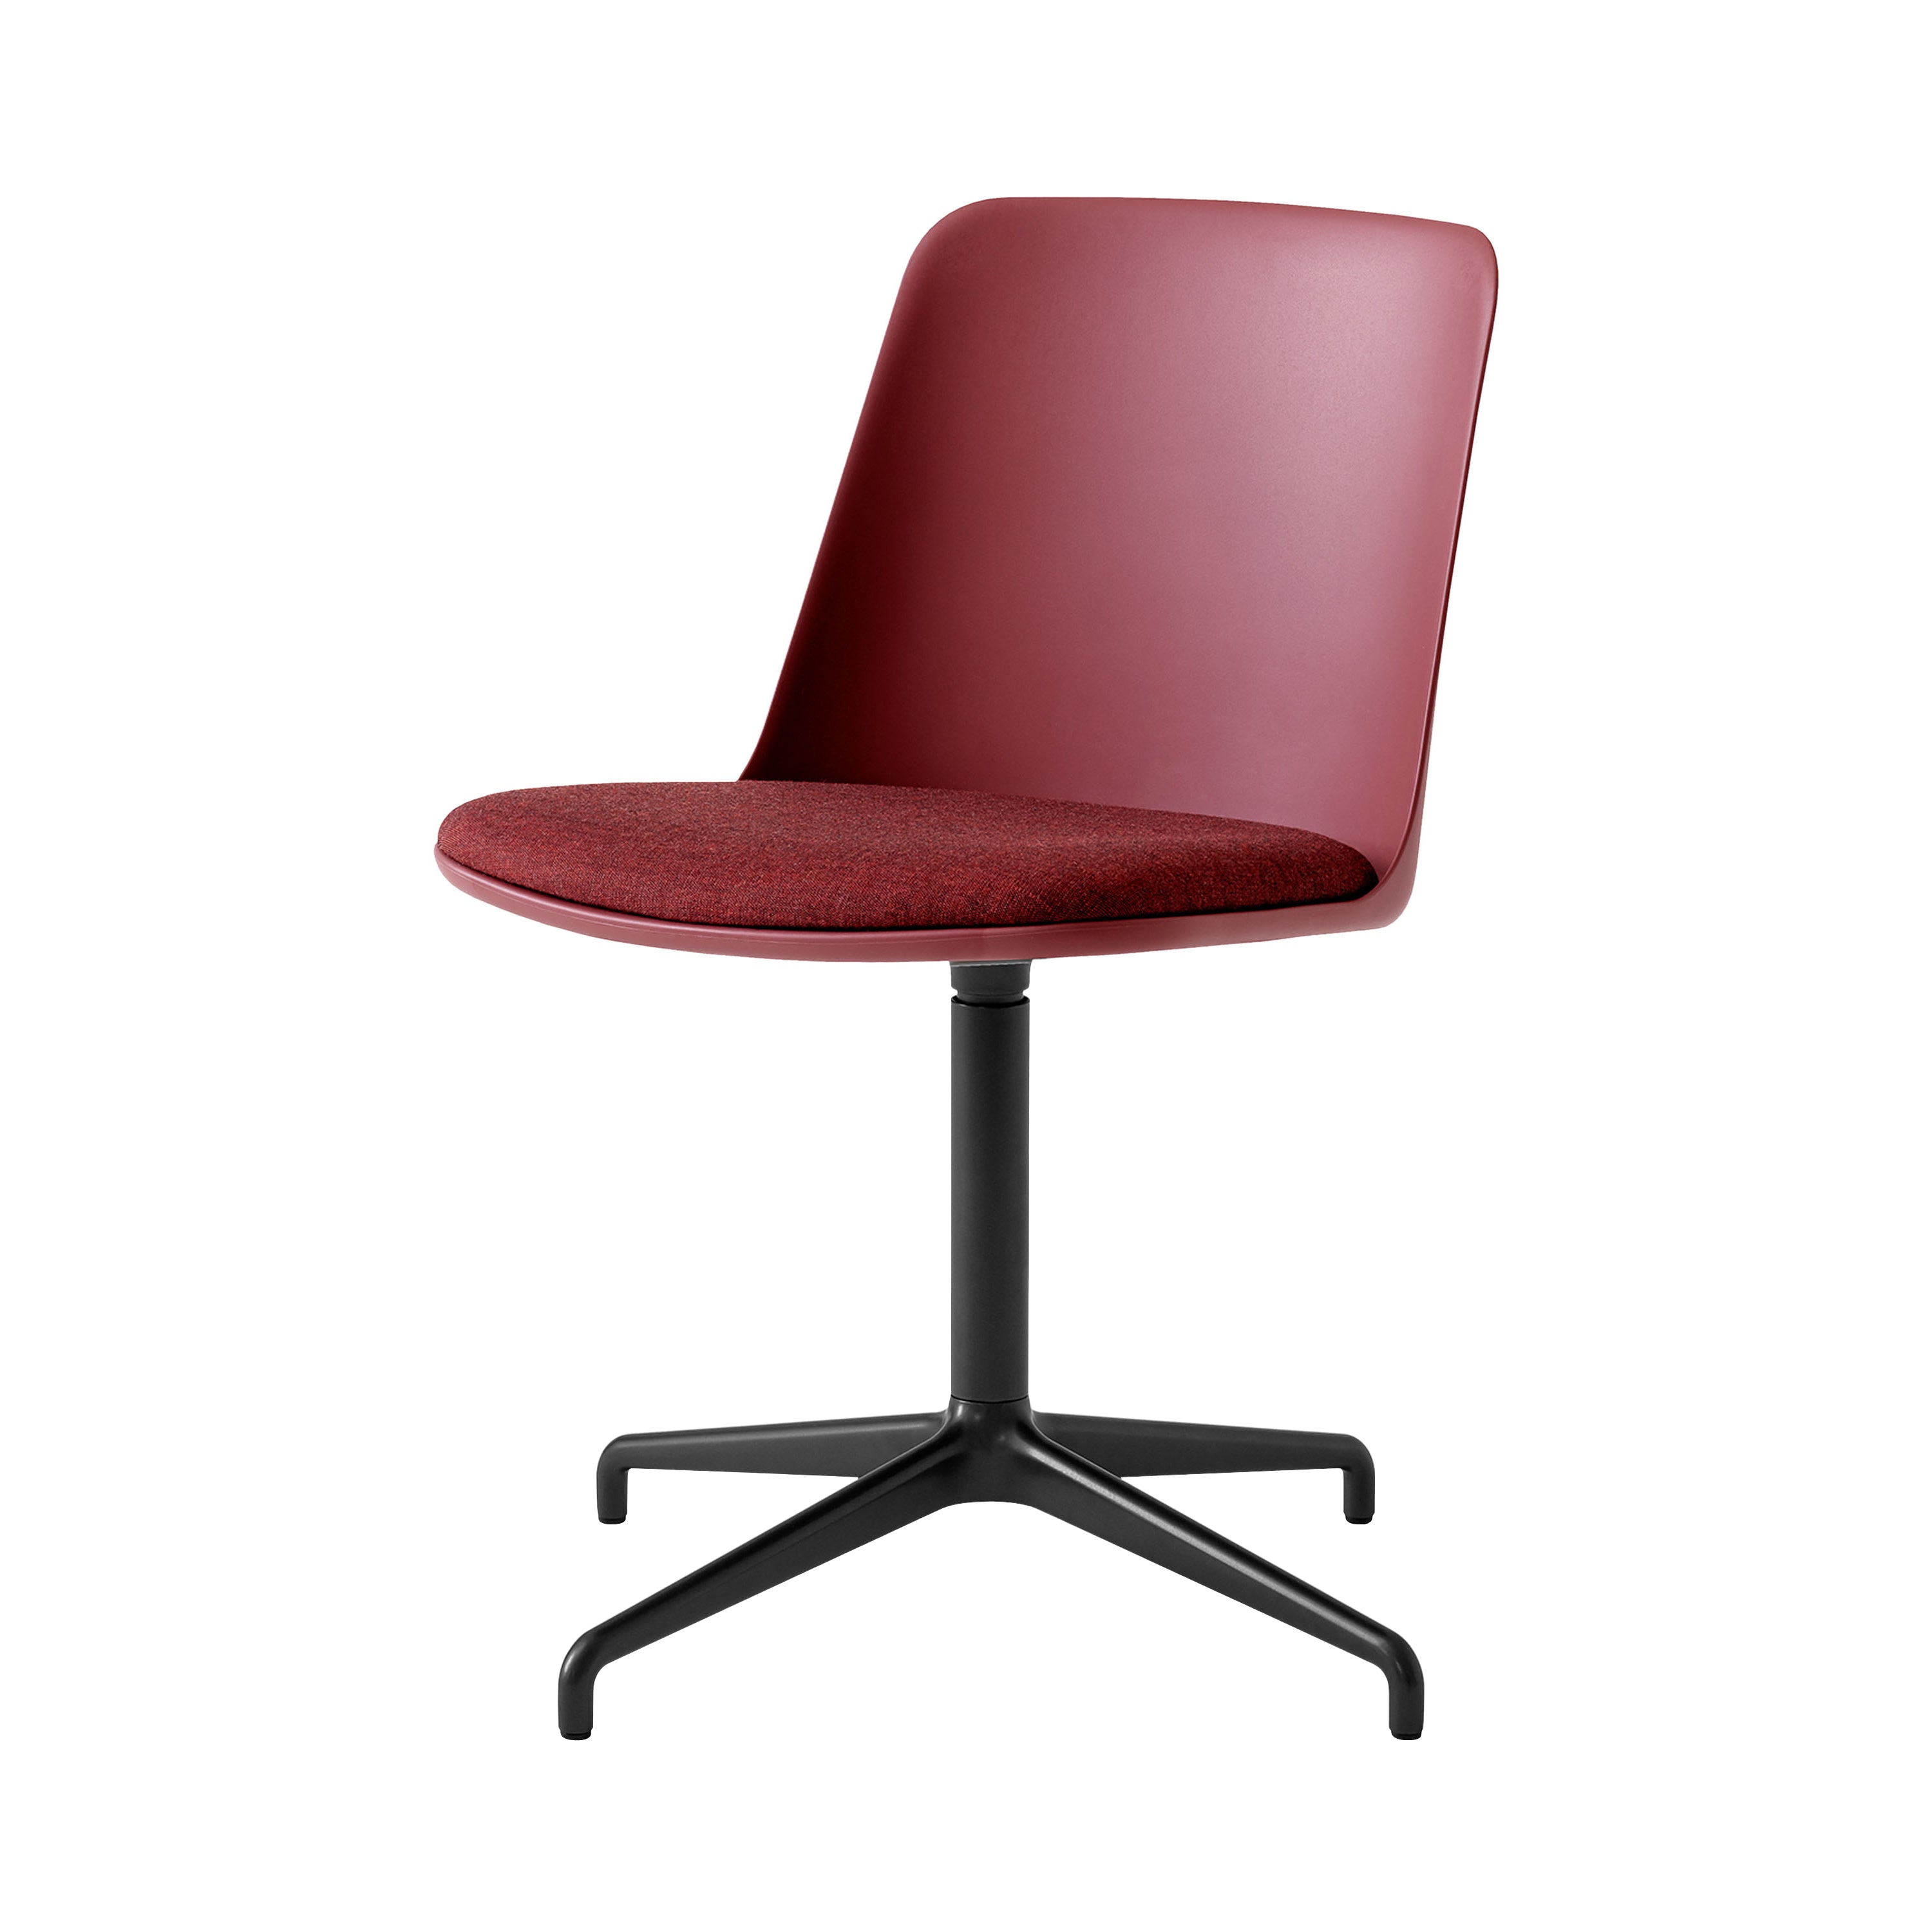 Rely Chair HW12: Red Brown + Black